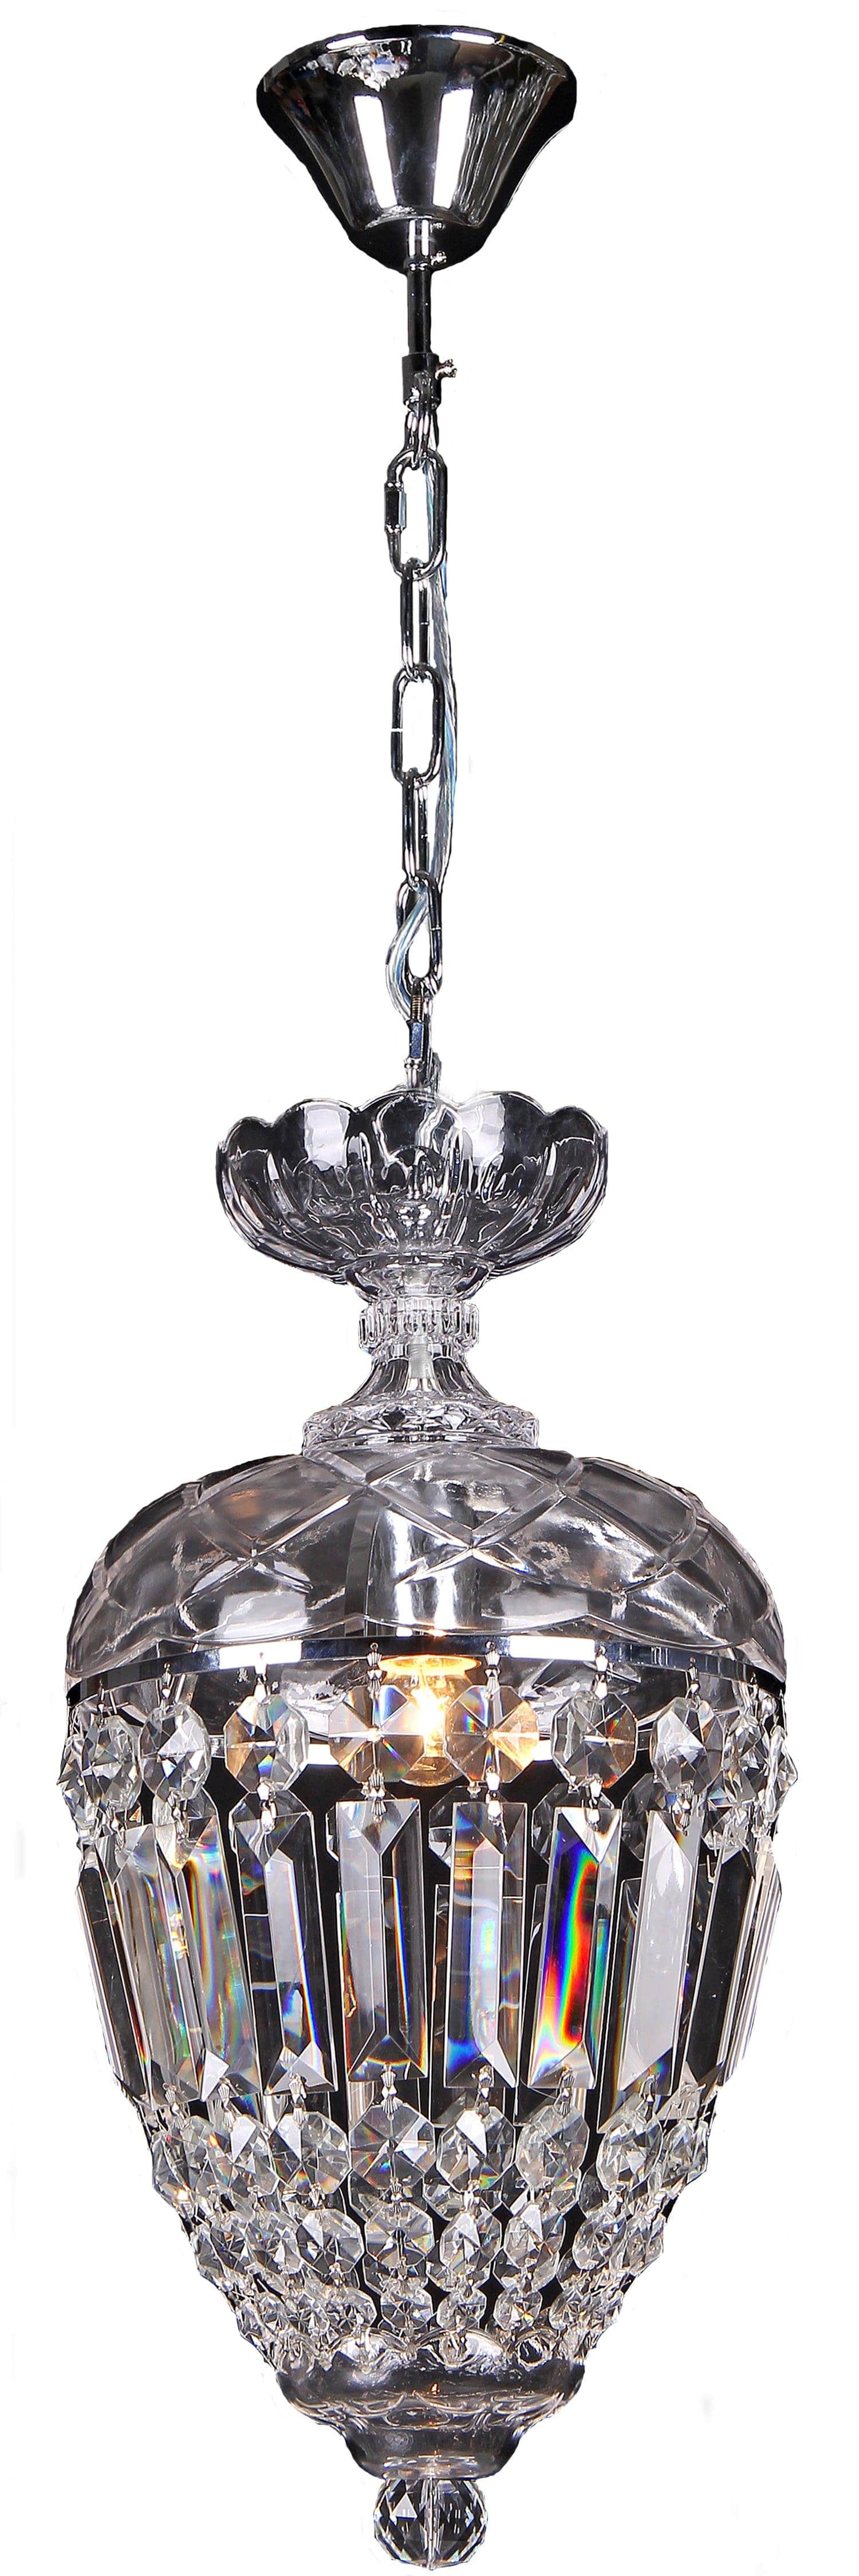 Lode Lighting Chandeliers Daylight Or Warm White / Chrome Mozart Crystal Basket Pendant Light in Chrome Lights-For-You 1000341